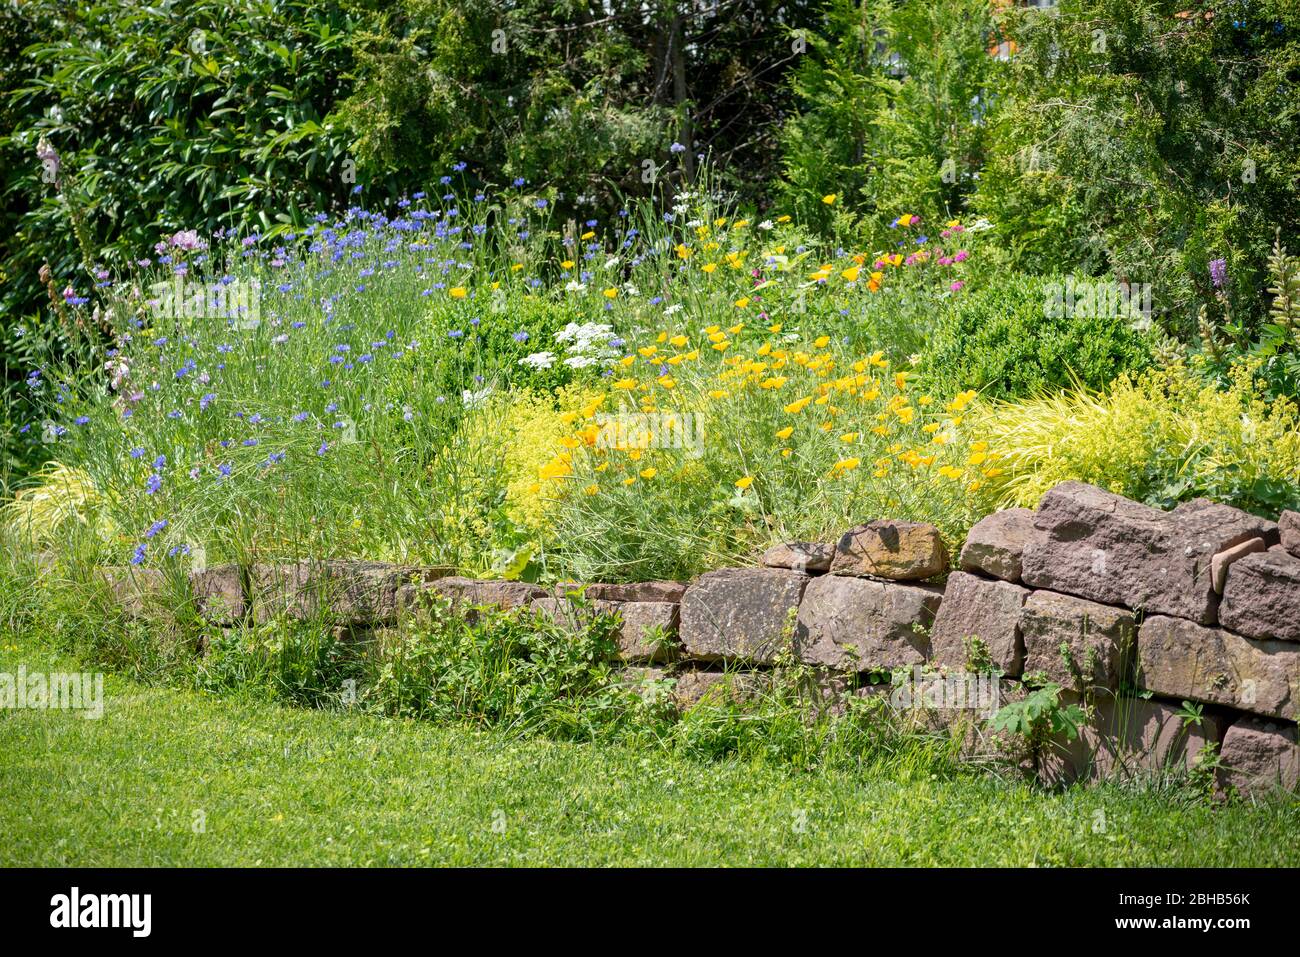 Garden with colorful ornamental flowers, flower meadow. Stock Photo